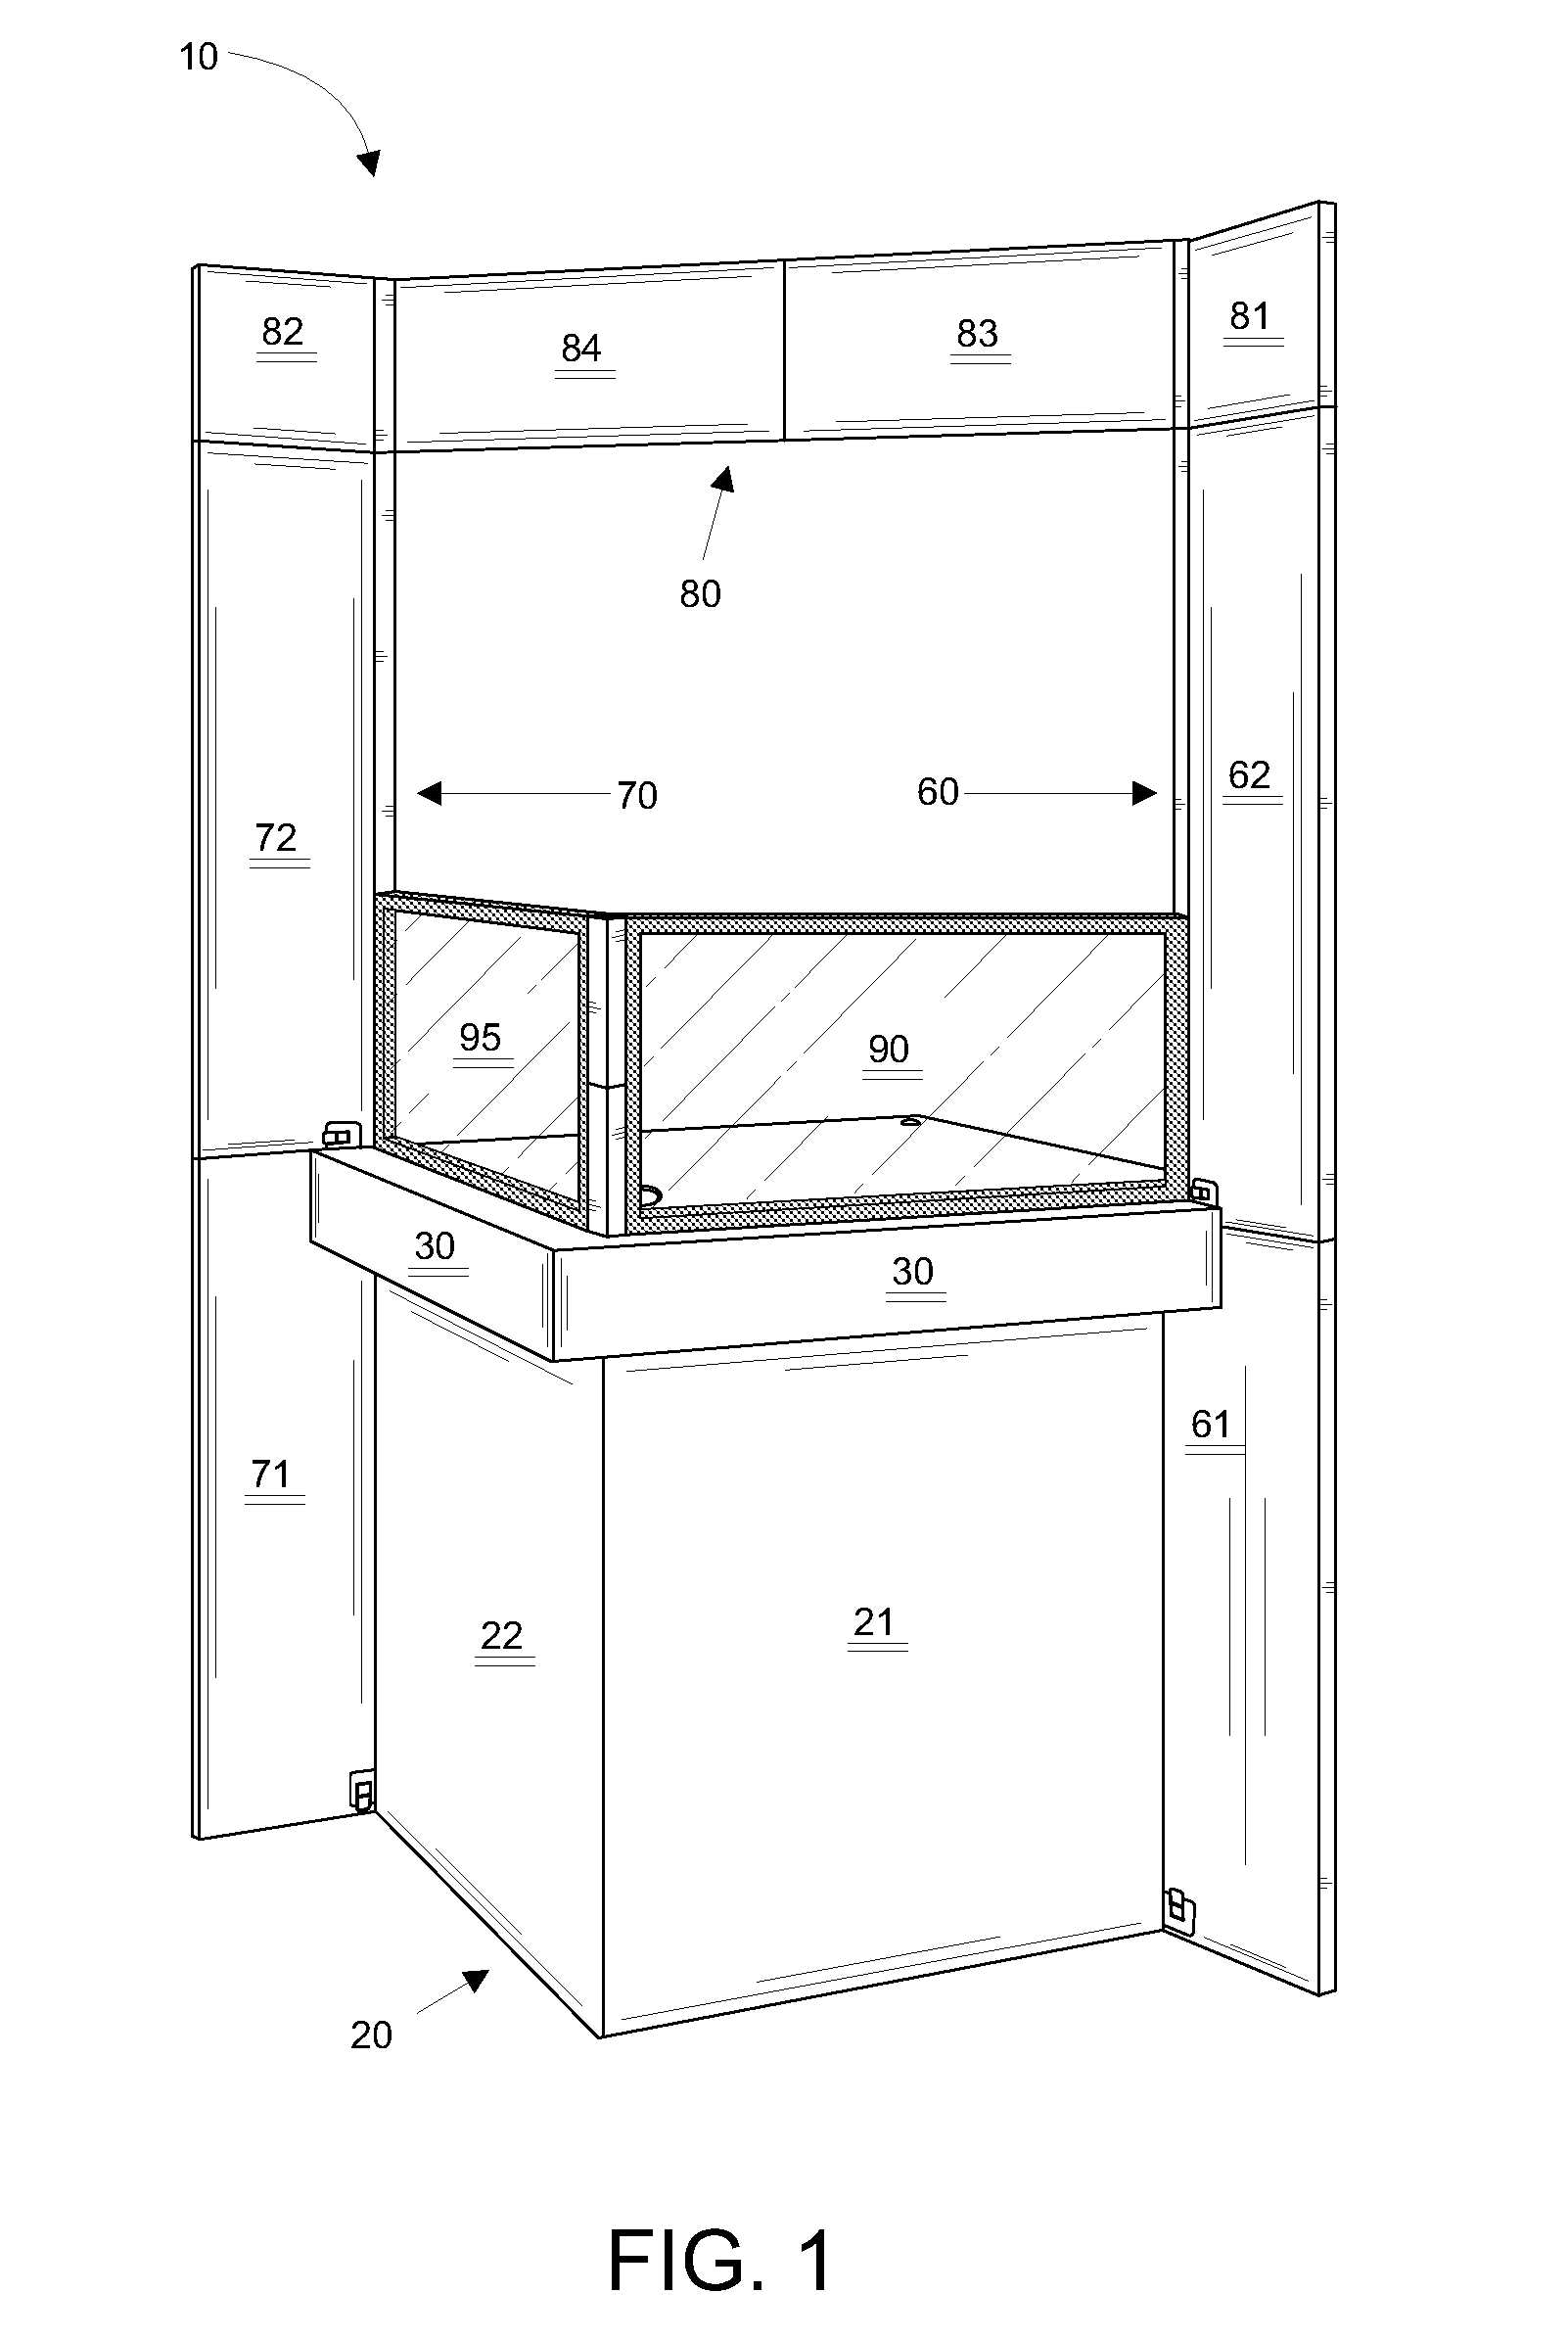 Dismantable writing desk storable in a case